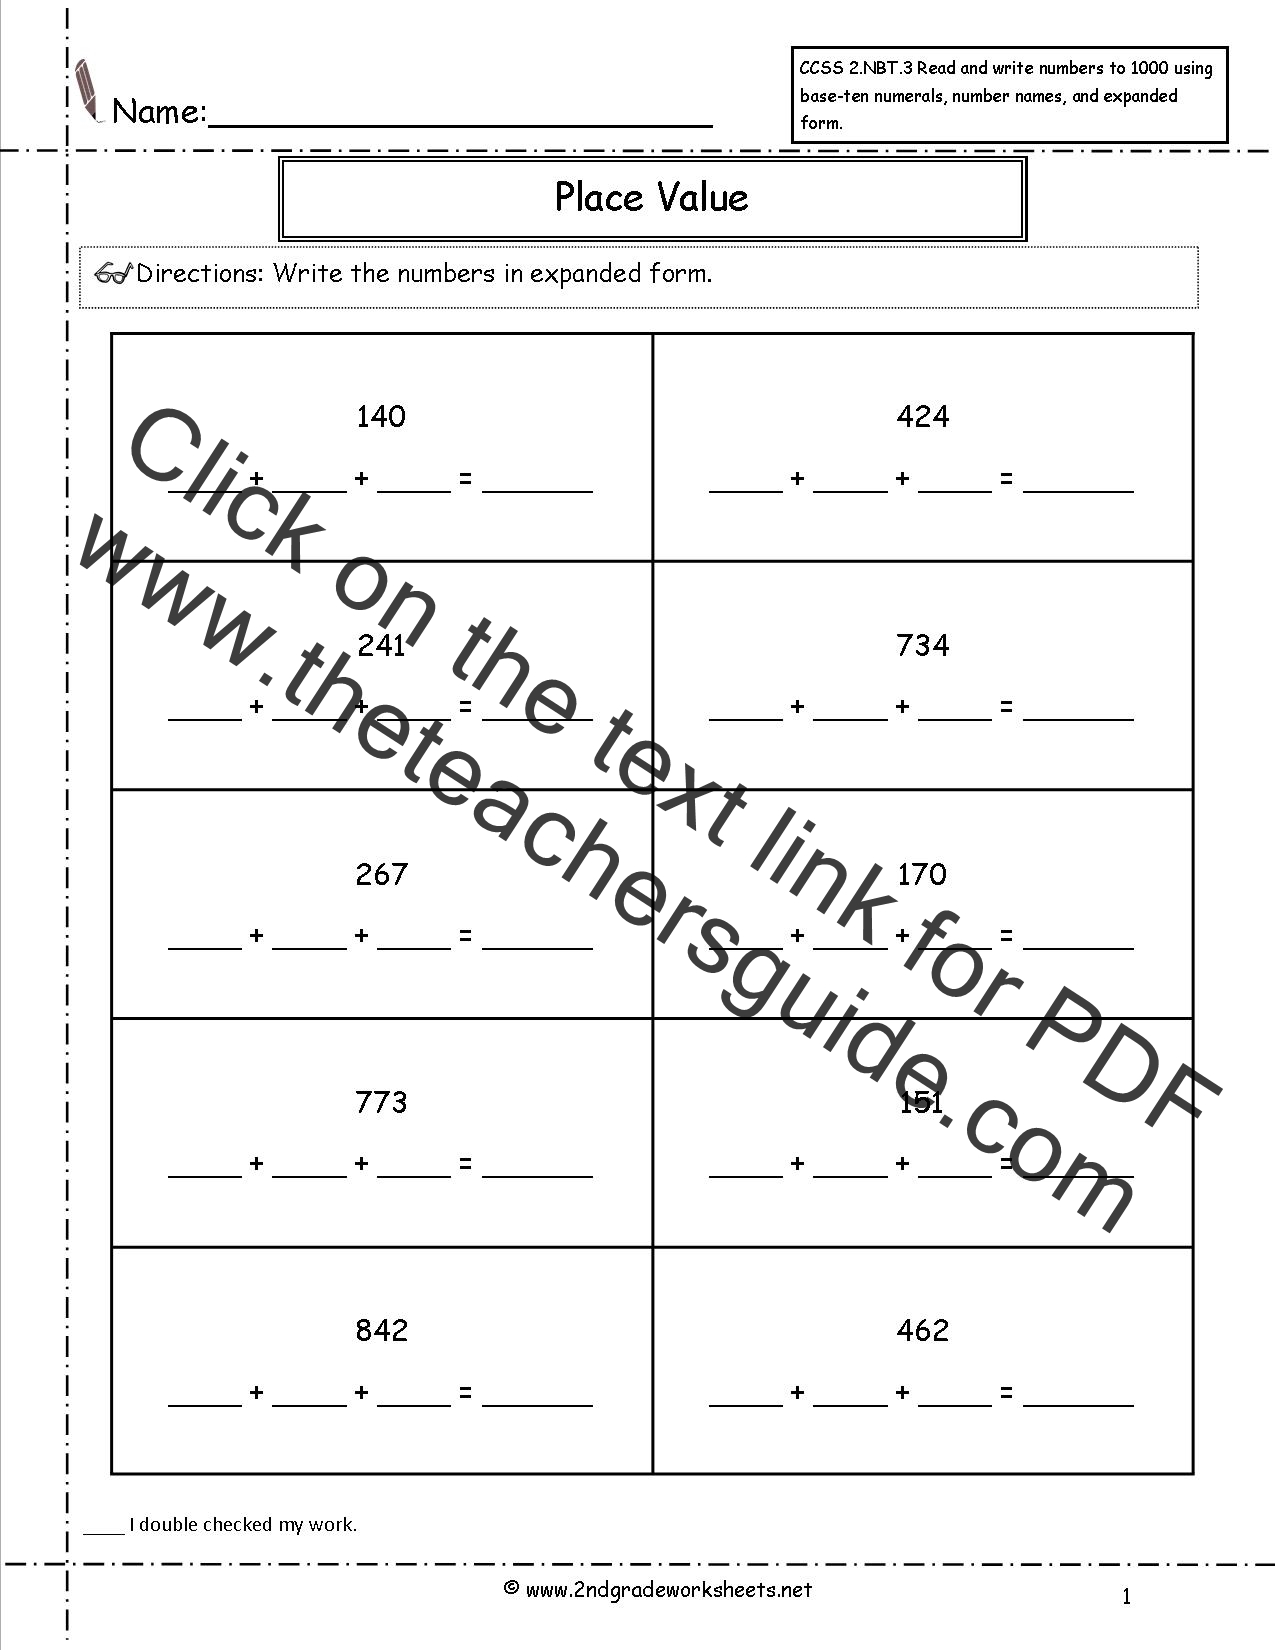 ccss-2-nbt-3-worksheets-place-value-worksheets-read-and-write-numbers